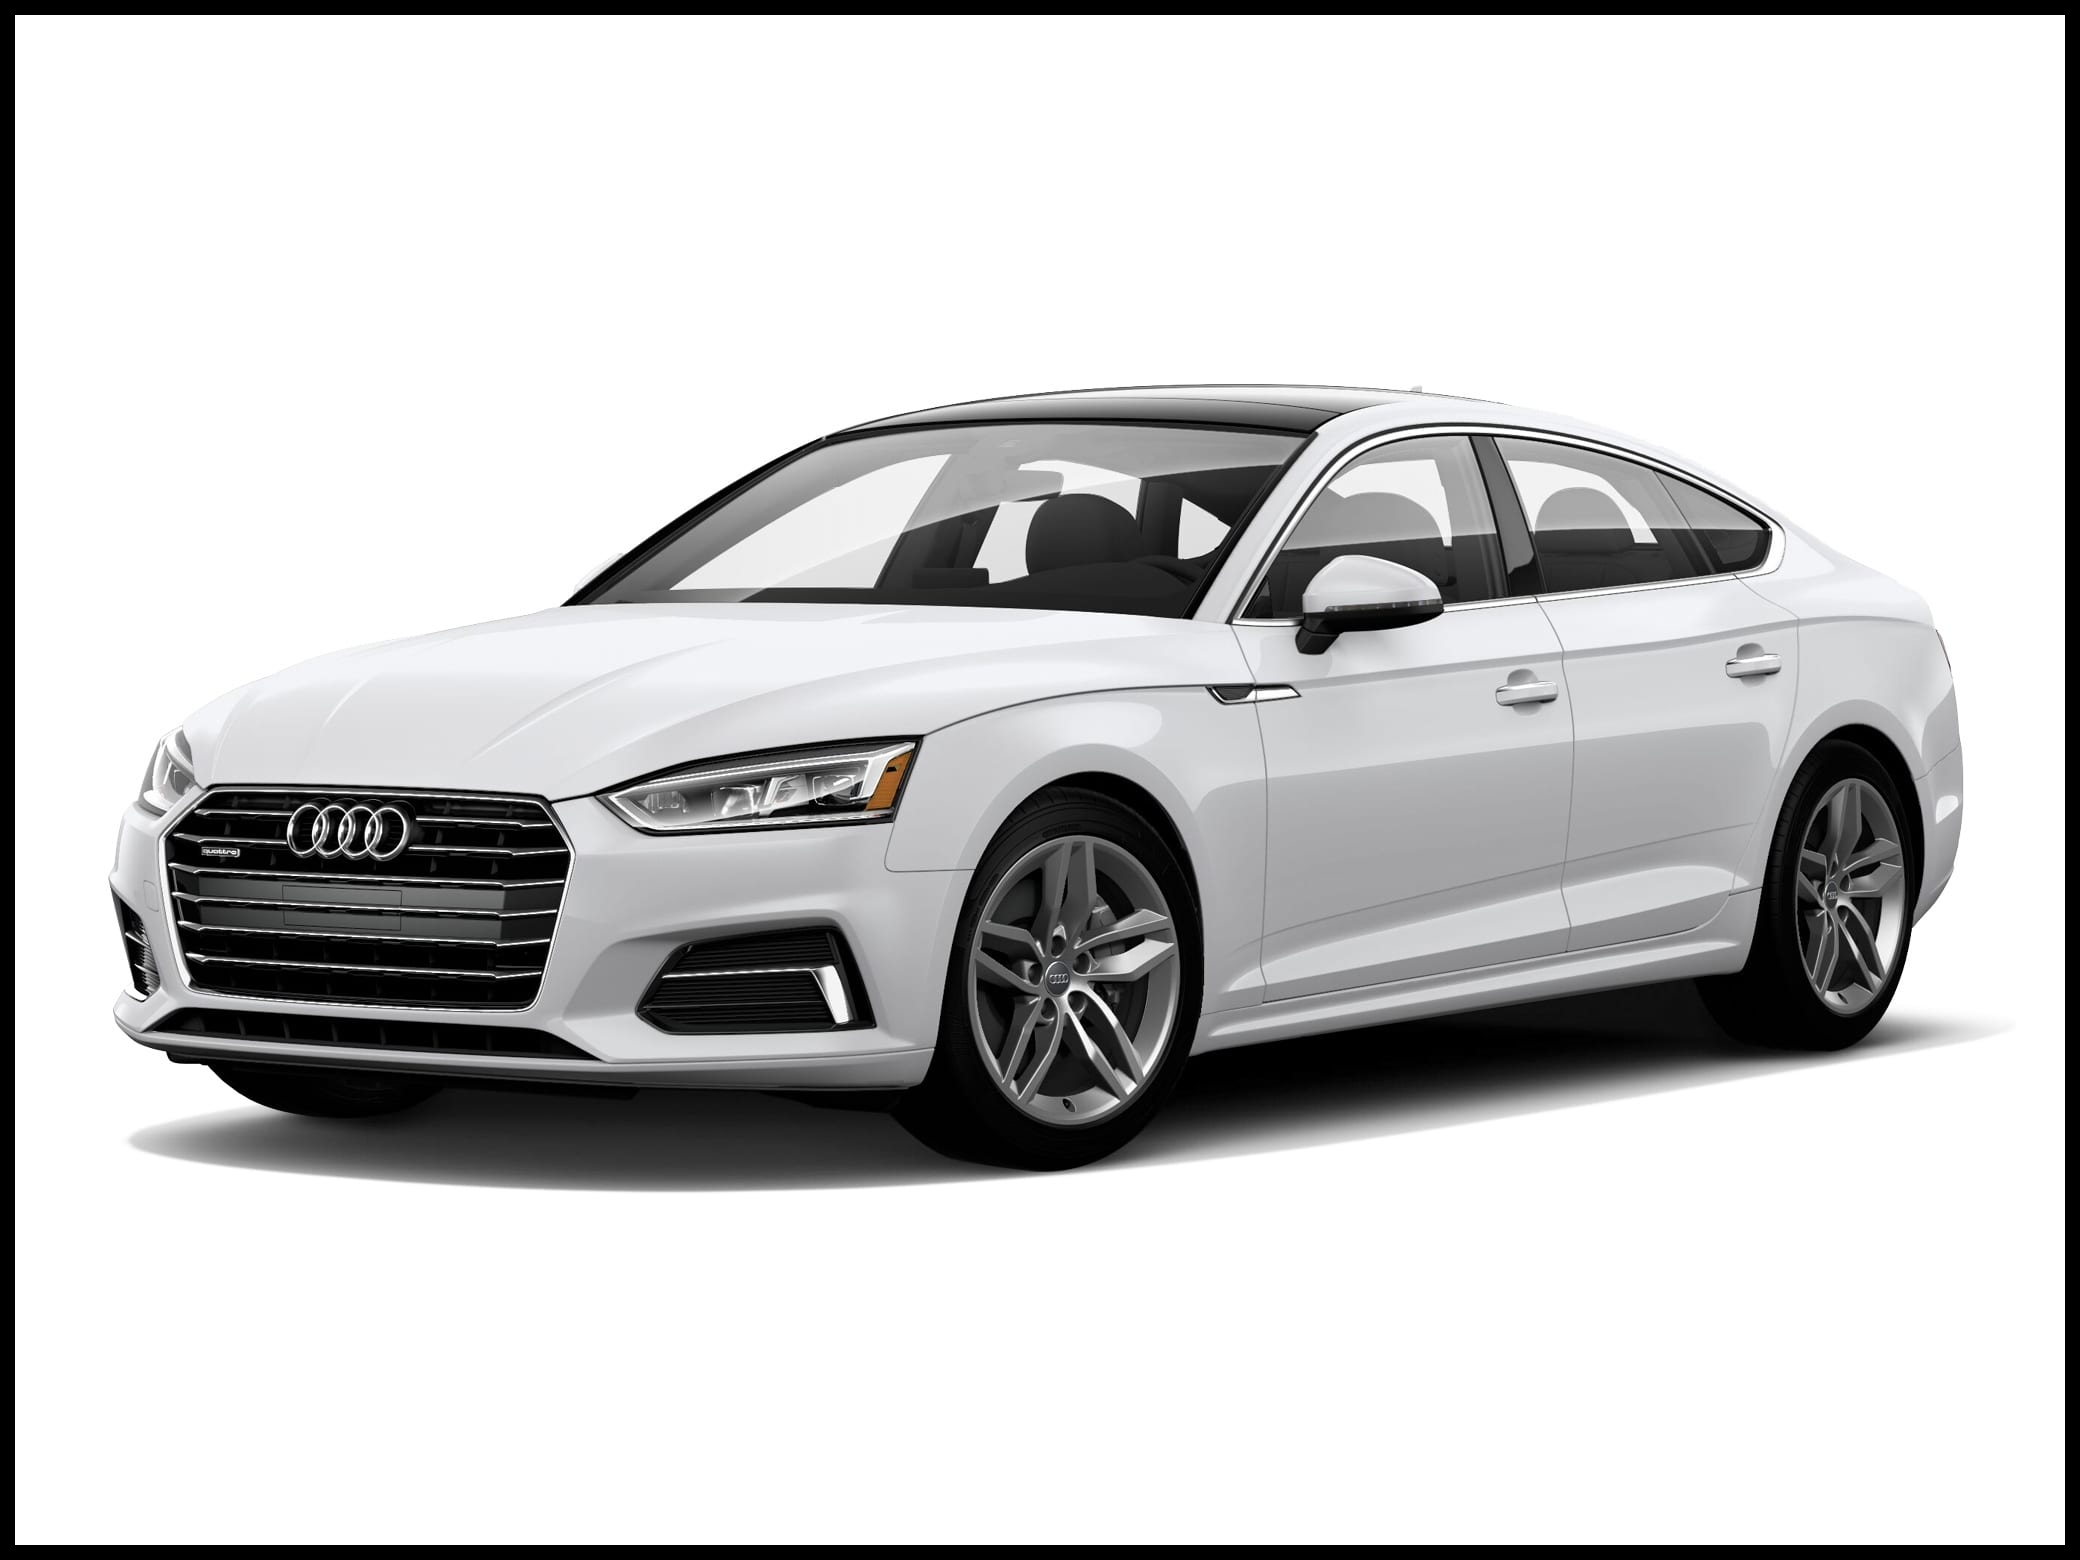 View photos watch videos and a quote on a new 2019 Audi A5 in Danbury CT